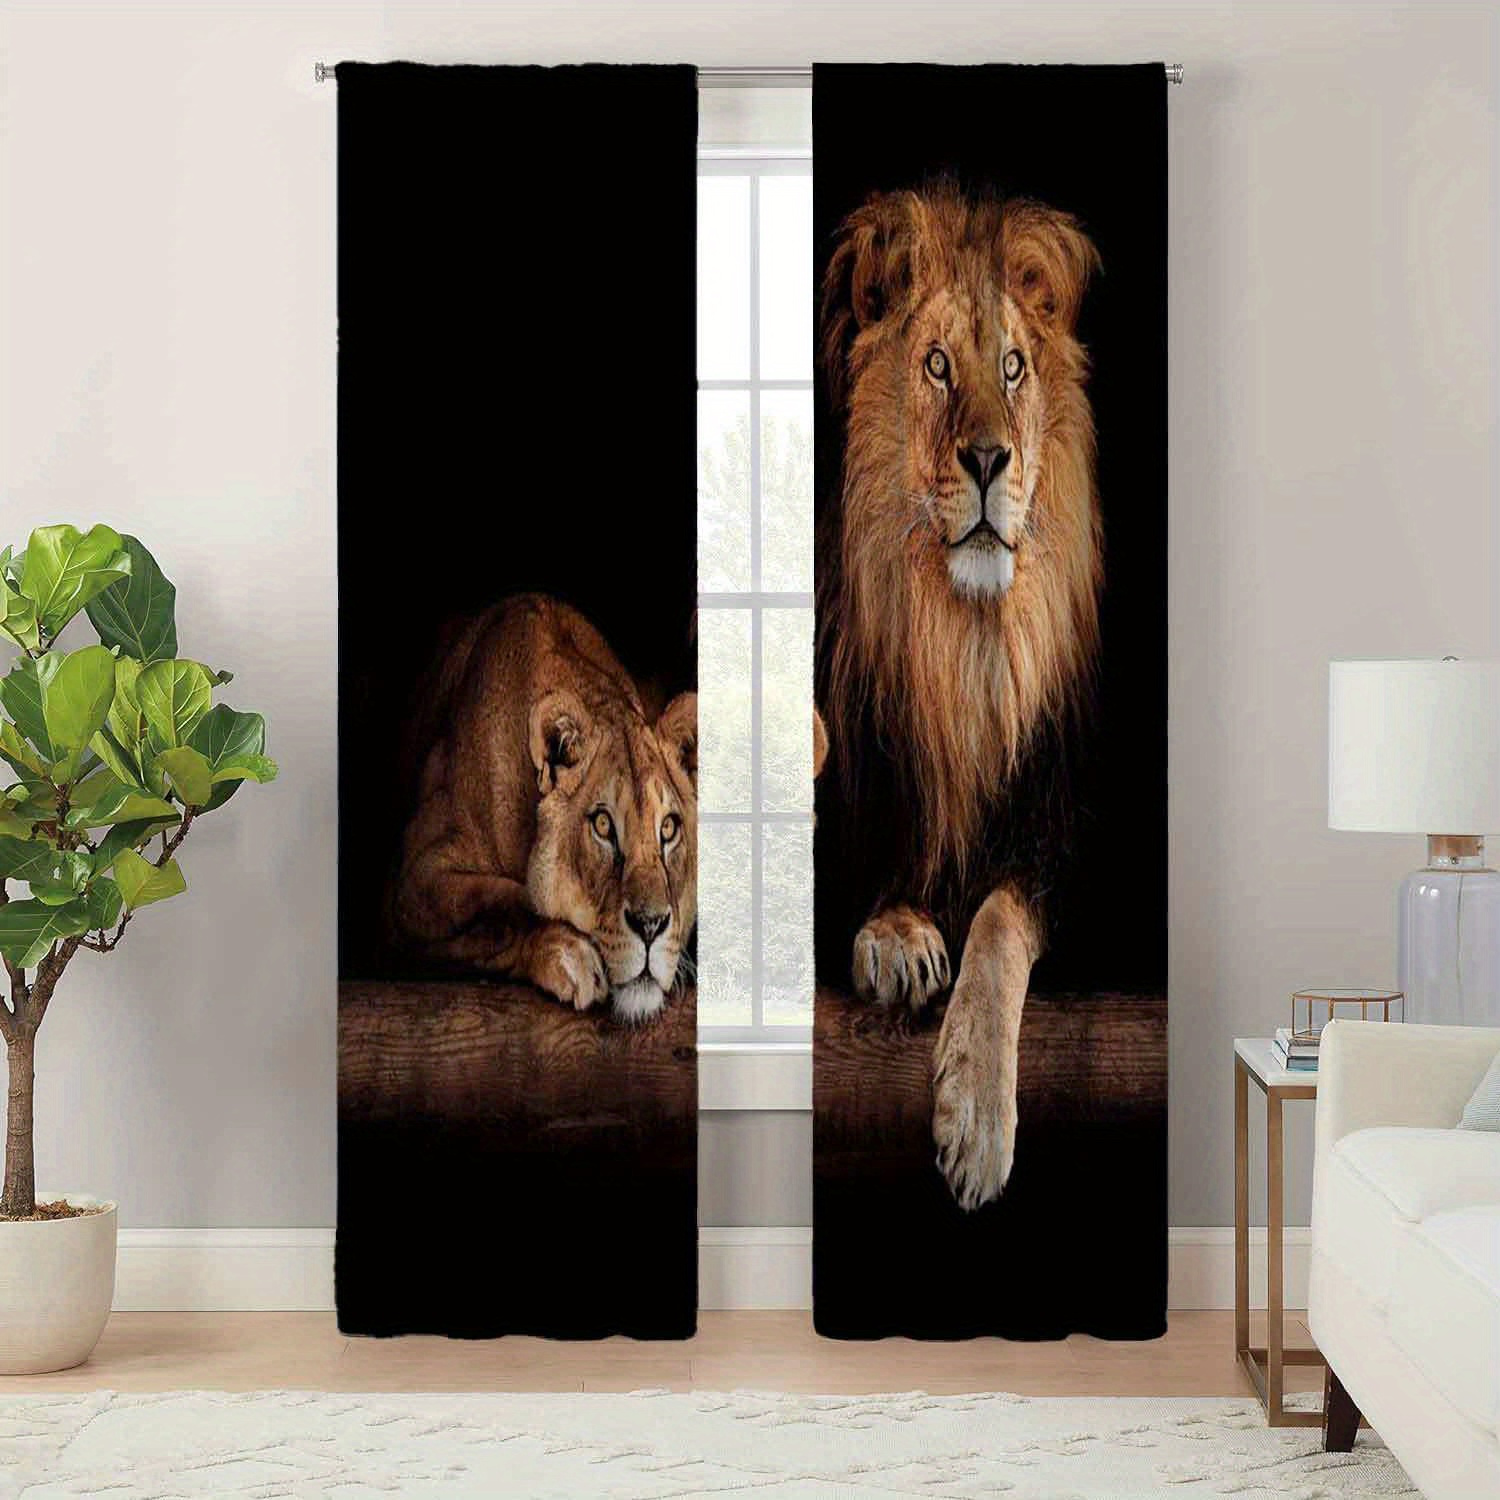 

2pcs, Modern Minimalist Style Living Room Room Decoration Curtains, Tiger Animal Pattern Printed Curtains, Easy Maintenance, Seasonal Charm For Living & Bedroom Spaces, Durable And Easy To Hang